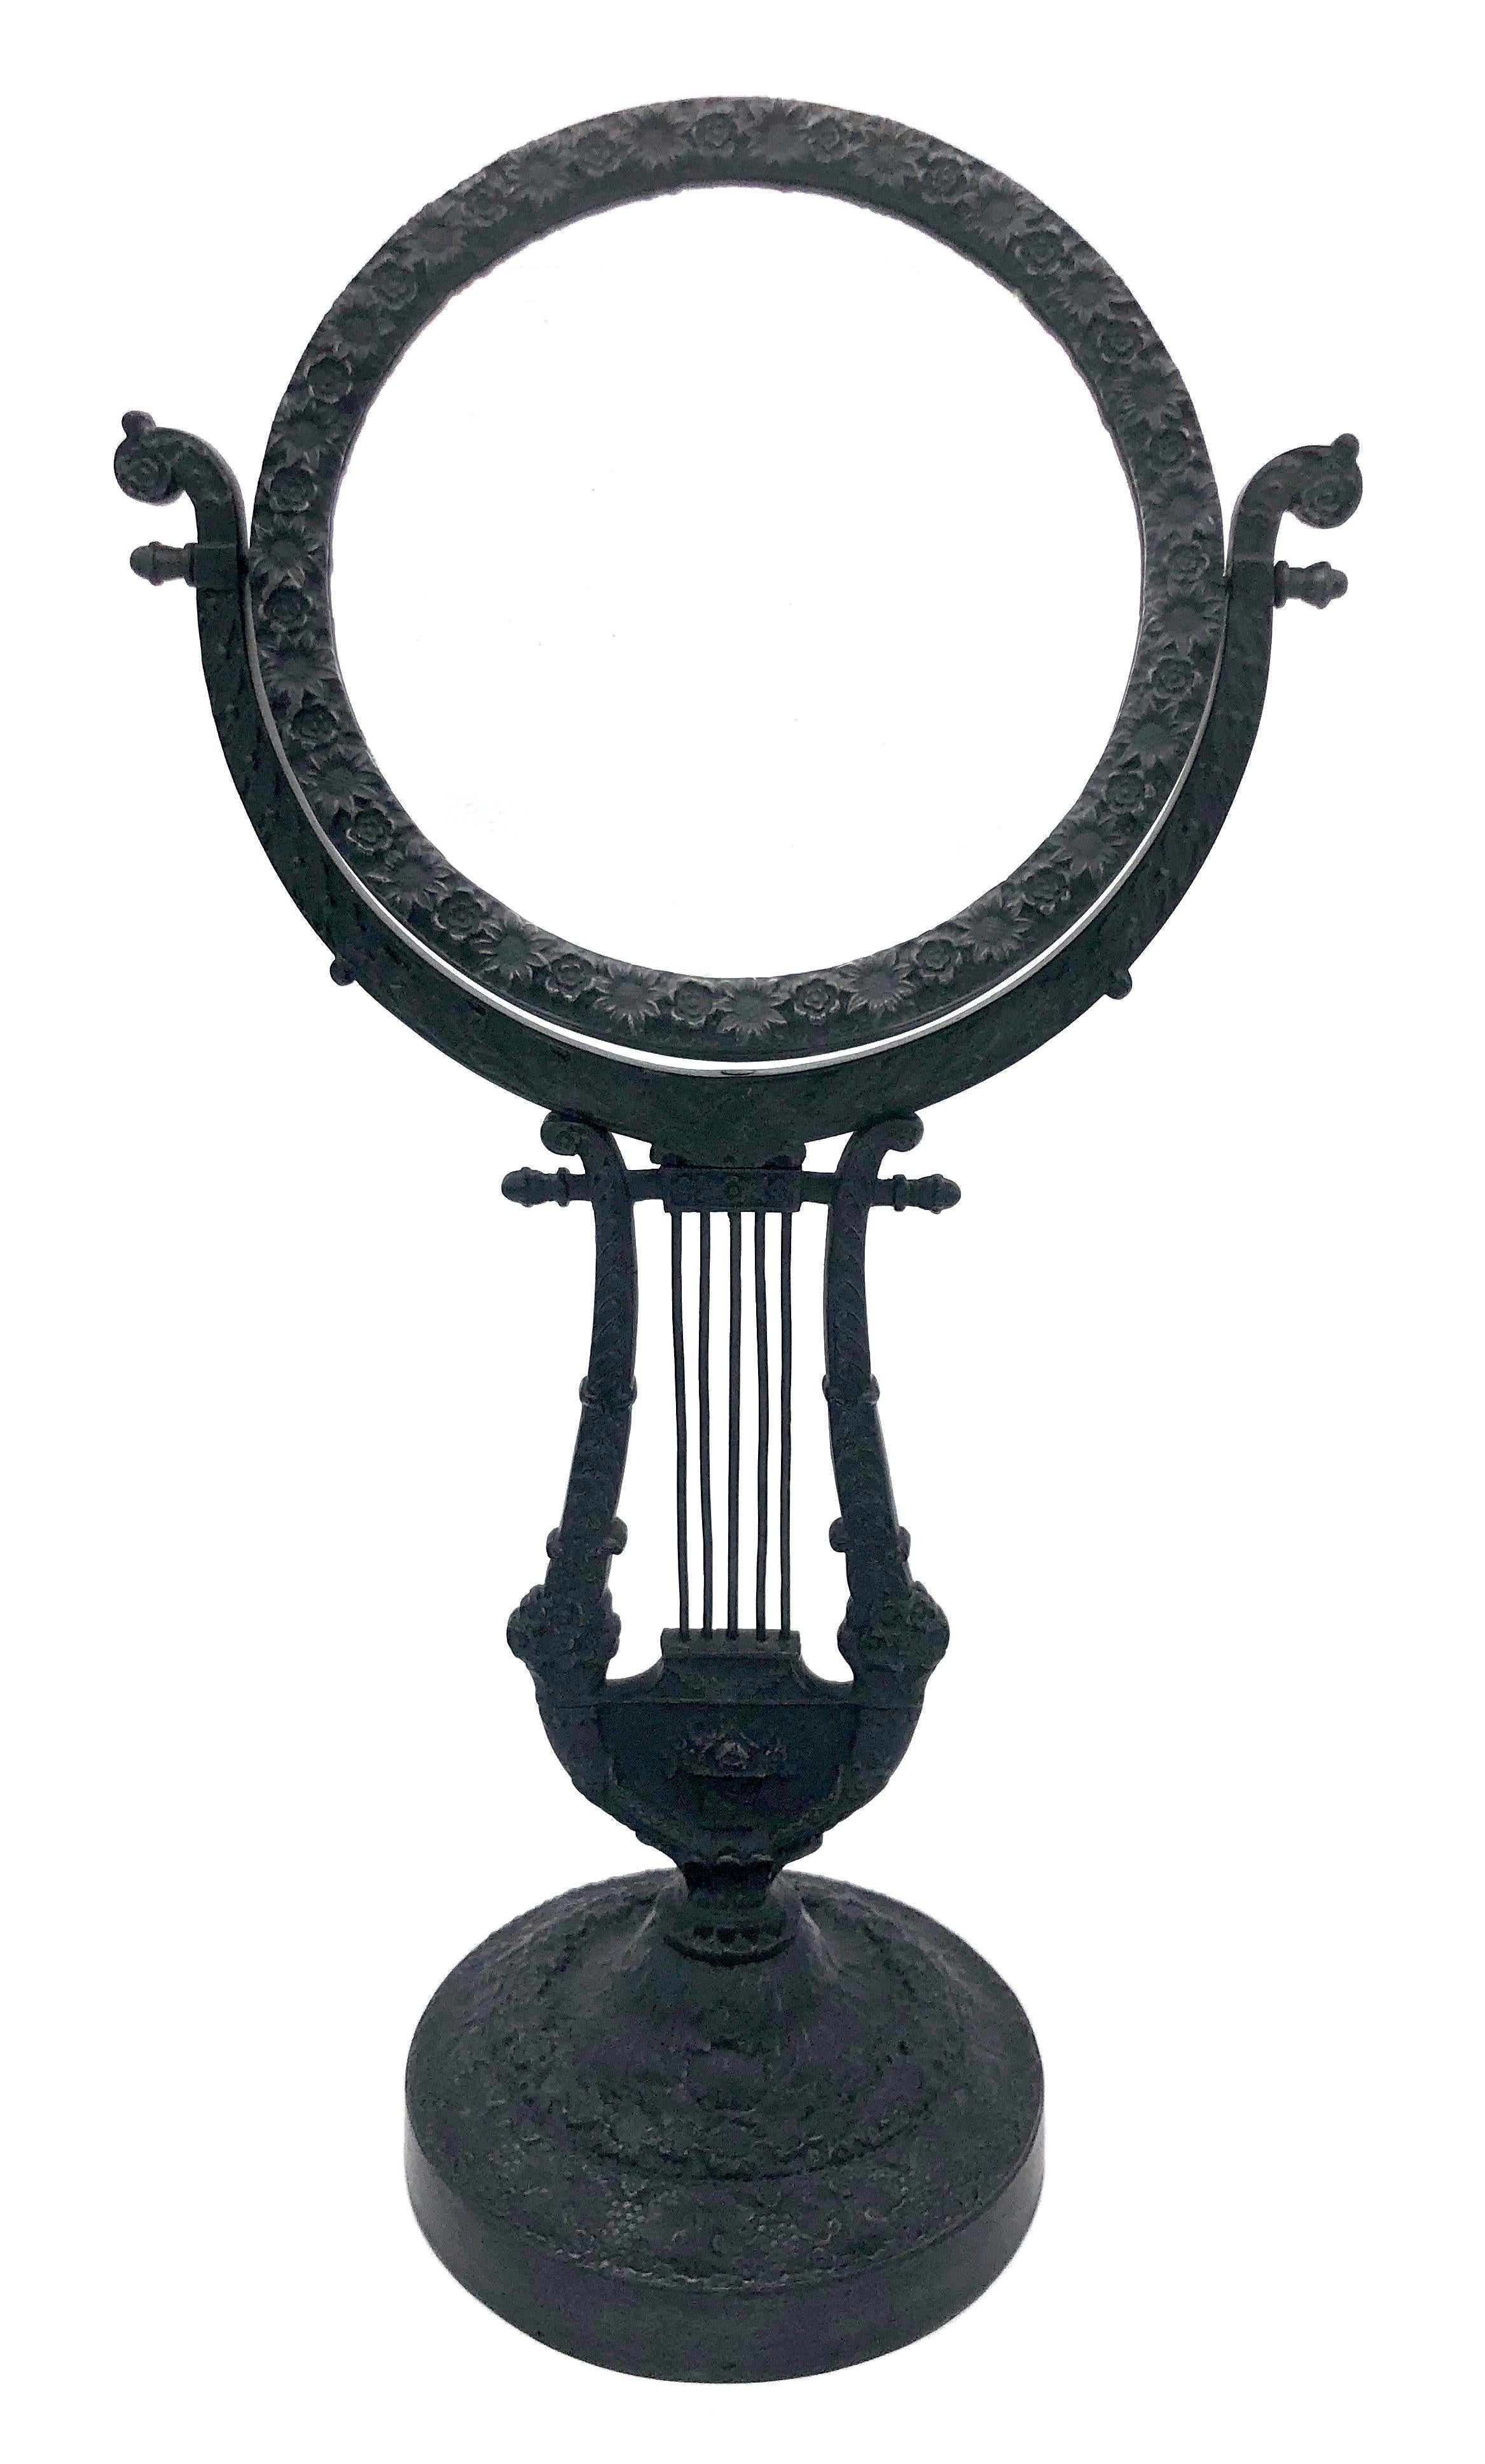 This very elegant revolving table mirror is made our of cast iron. It features the most intricate detailing and has retained it's original mirror glass.
It is decorated with different kind of leaves, oak leaves, grapes, vine, a variety of flowers,